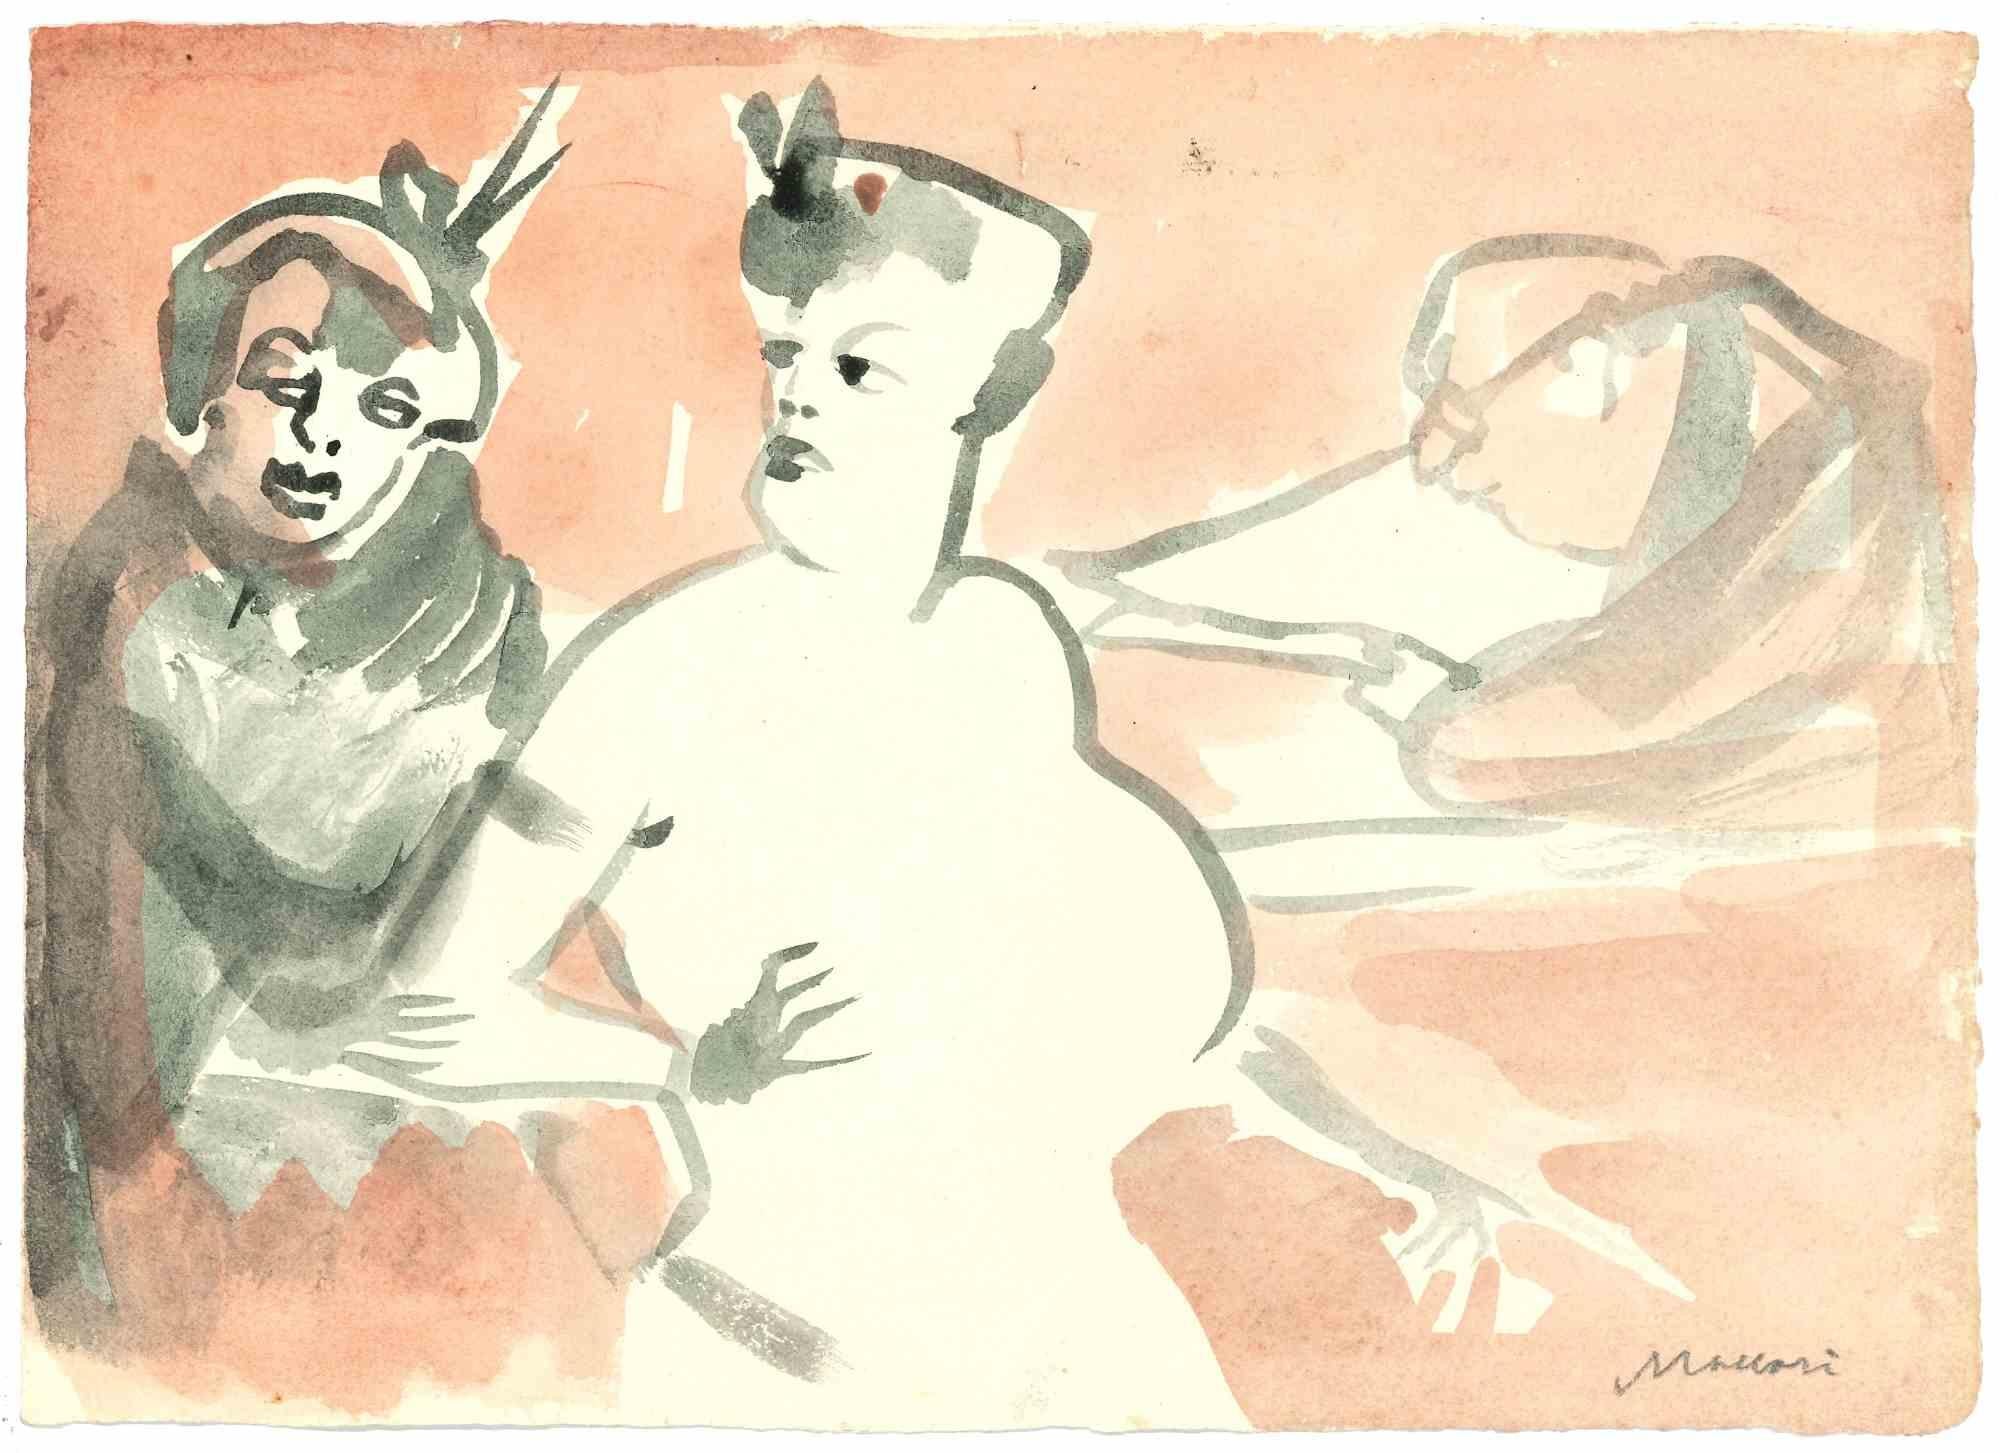 Figures is a watercolor drawing realized by Mino Maccari  (1924-1989) in the Mid-20th Century.

Hand-signed.

Good conditions with slight foxing.

Mino Maccari (Siena, 1924-Rome, June 16, 1989) was an Italian writer, painter, engraver and